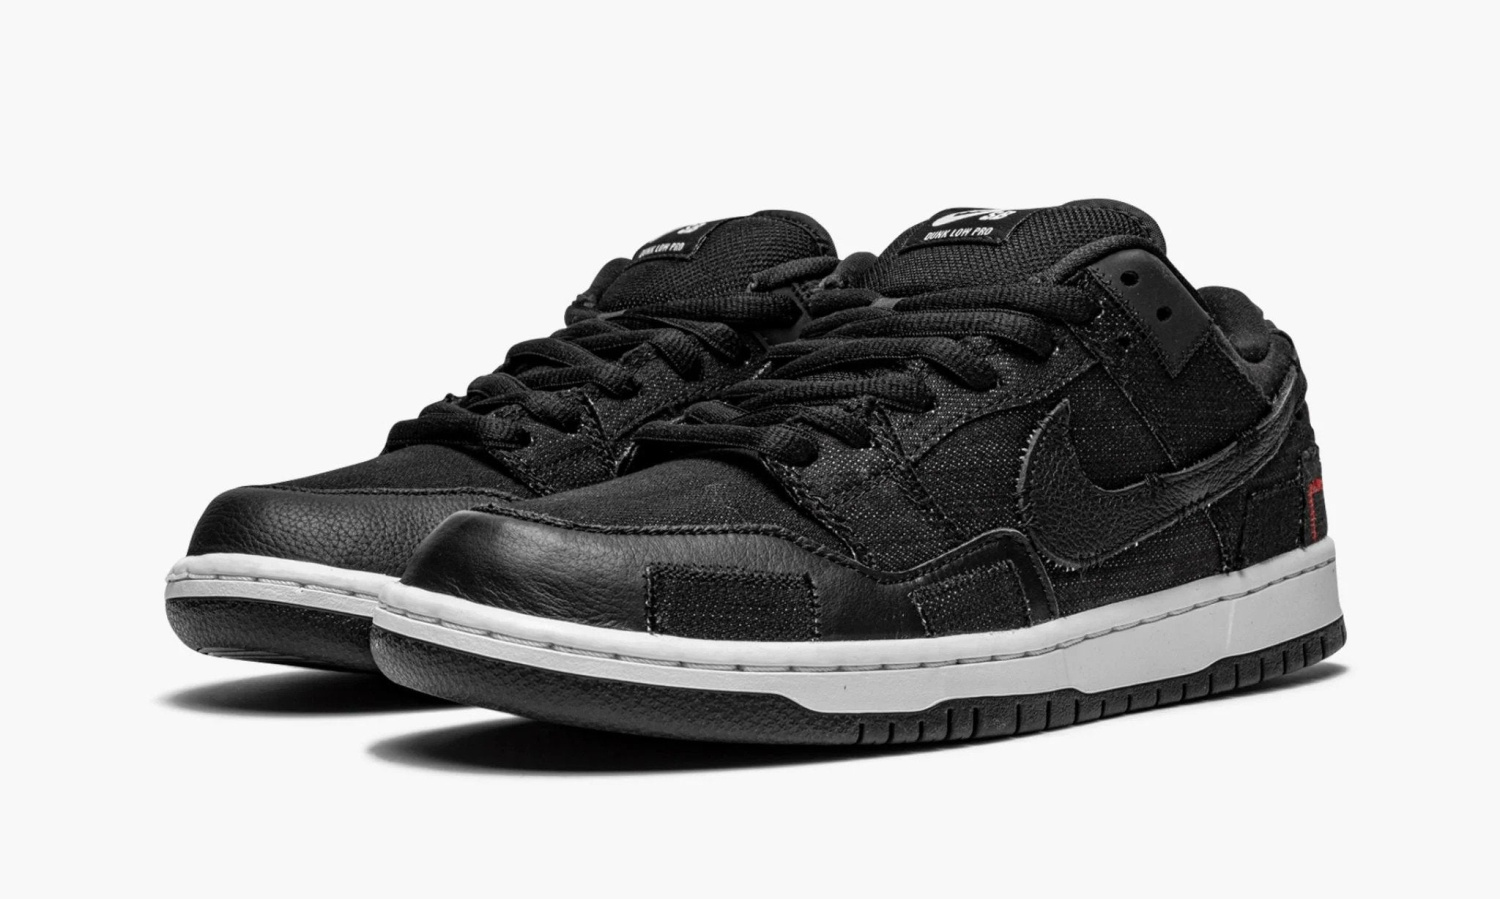 фото Dunk Low SB "Wasted Youth" (Nike Dunk Low)-DD8386 001